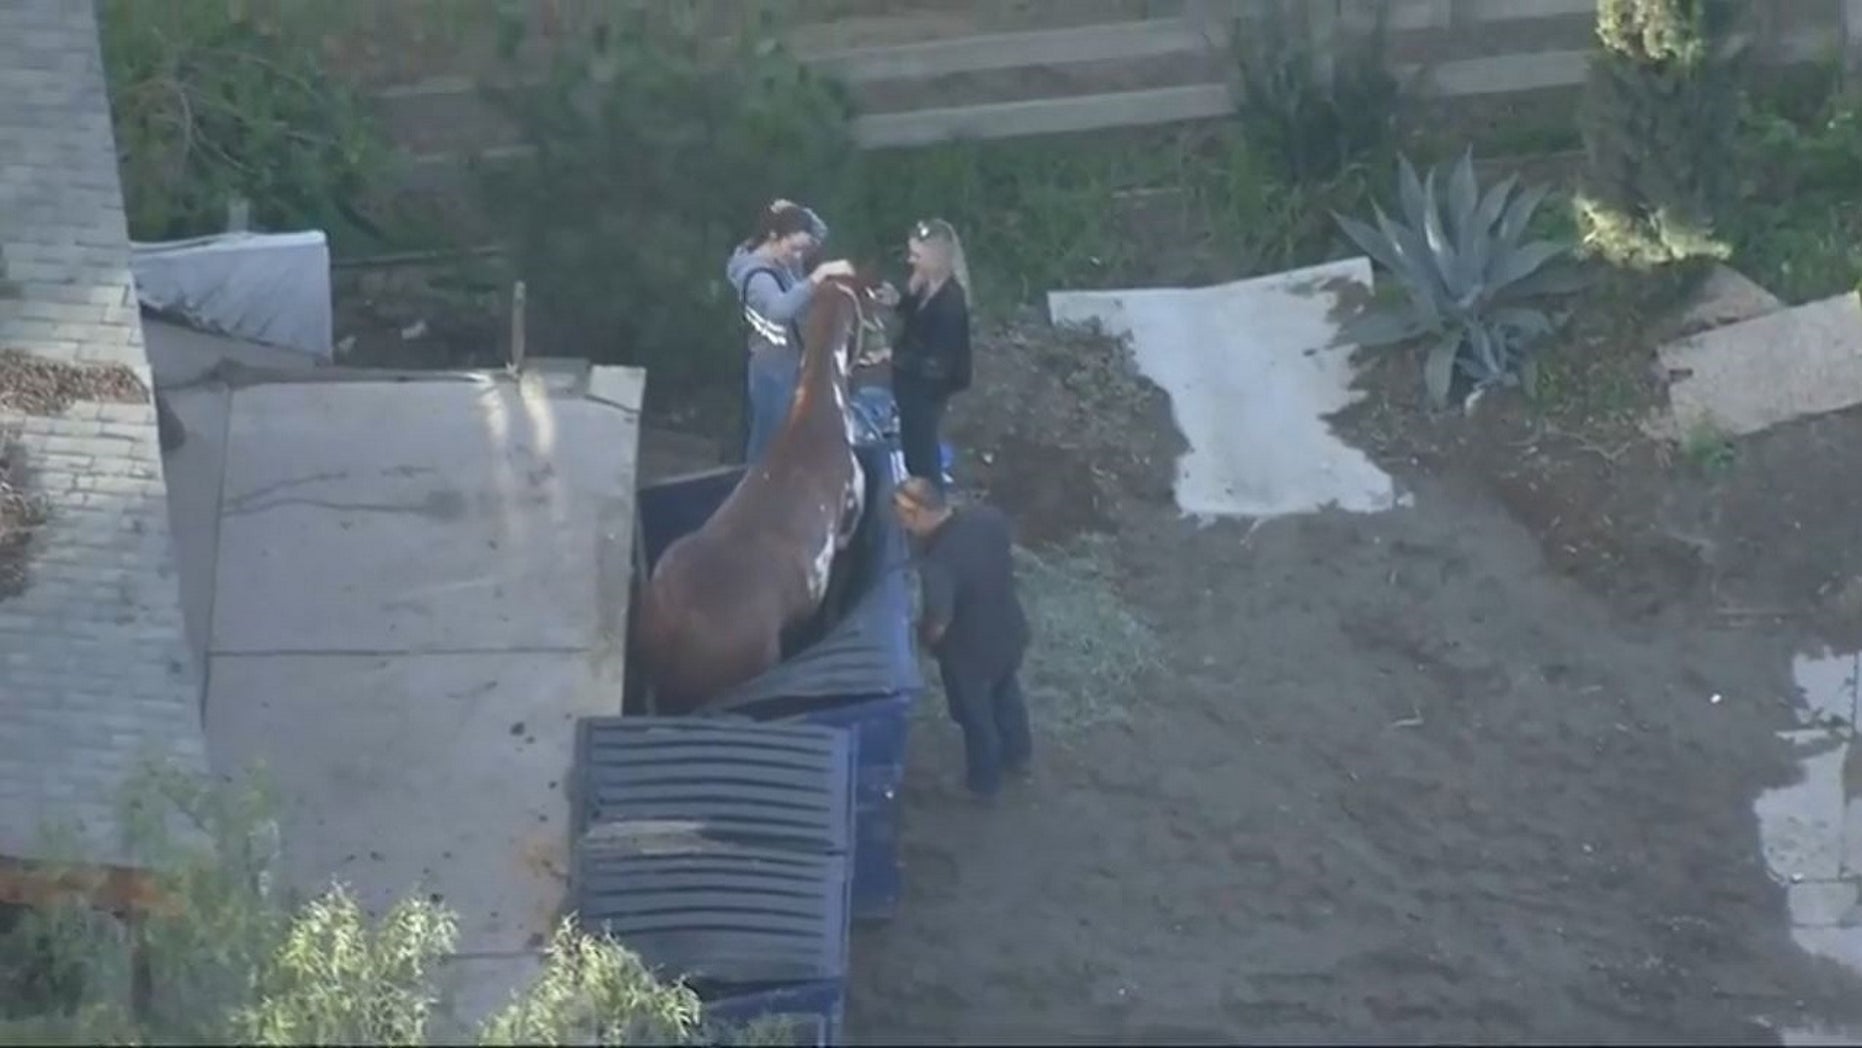 Horse hoisted to safety after getting stuck in dumpster